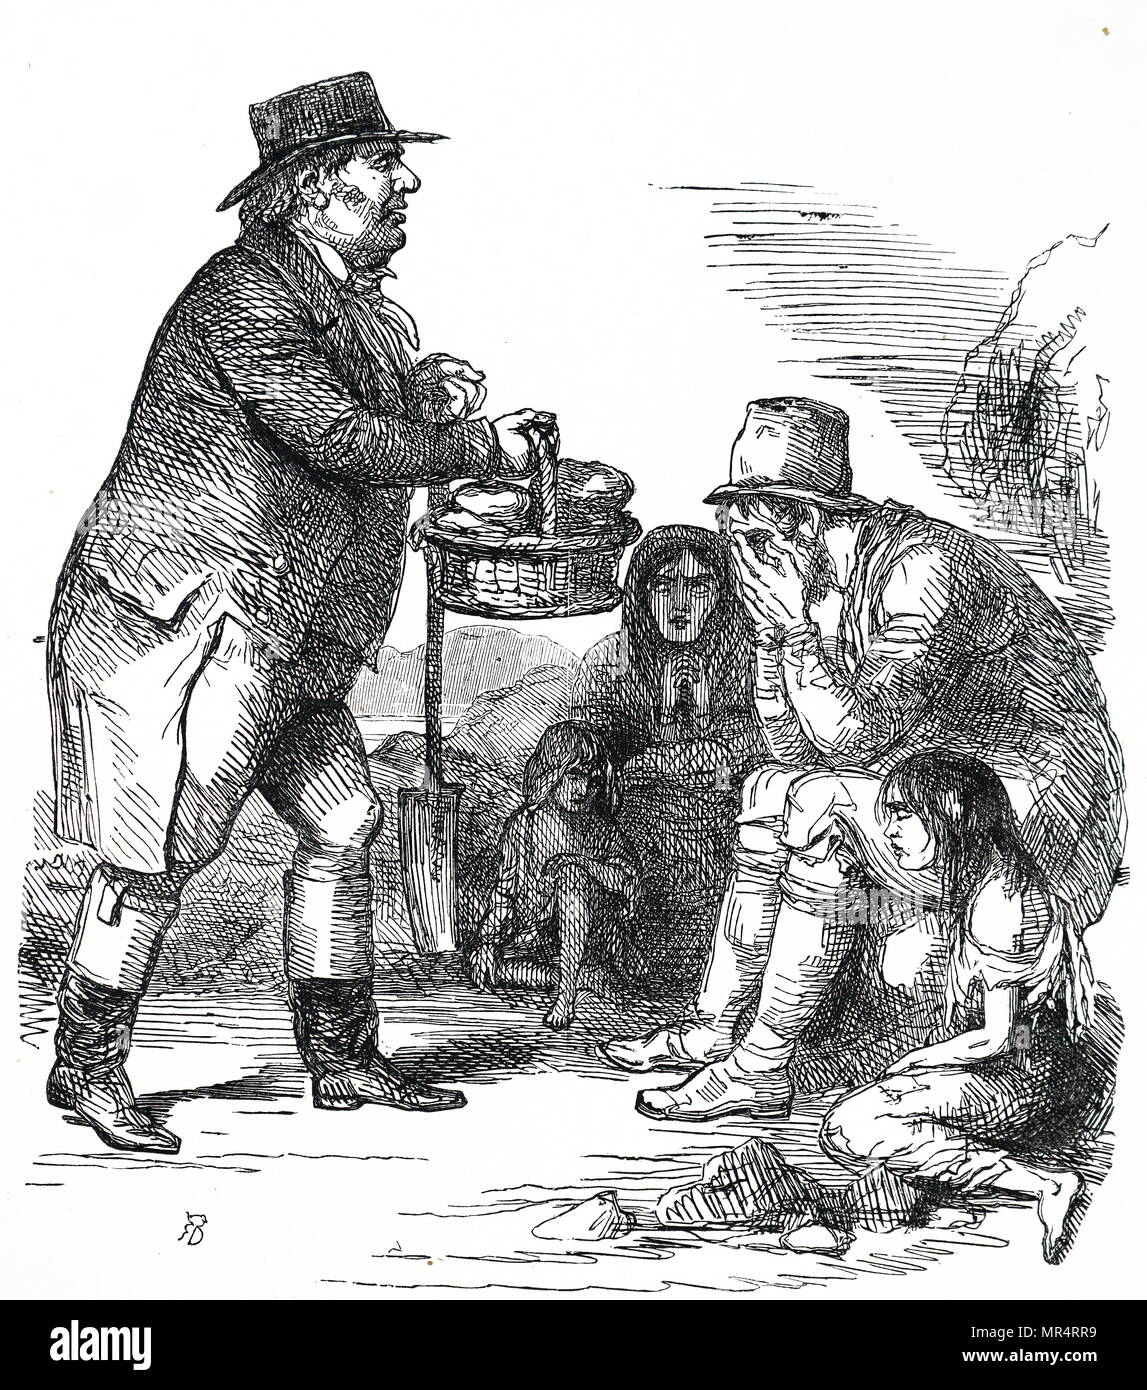 Cartoon commenting on the Irish Potato Famine. England, epitomised by John Bull, taking bread to the starving Irish peasants. The potatoes on which the Irish country people depended, had been destroyed by potato blight (Phytophora Infestans), a fungal infection spread by aphids. The infection remained in the soil which meant the staple diet could not be grown. Dated 19th century Stock Photo